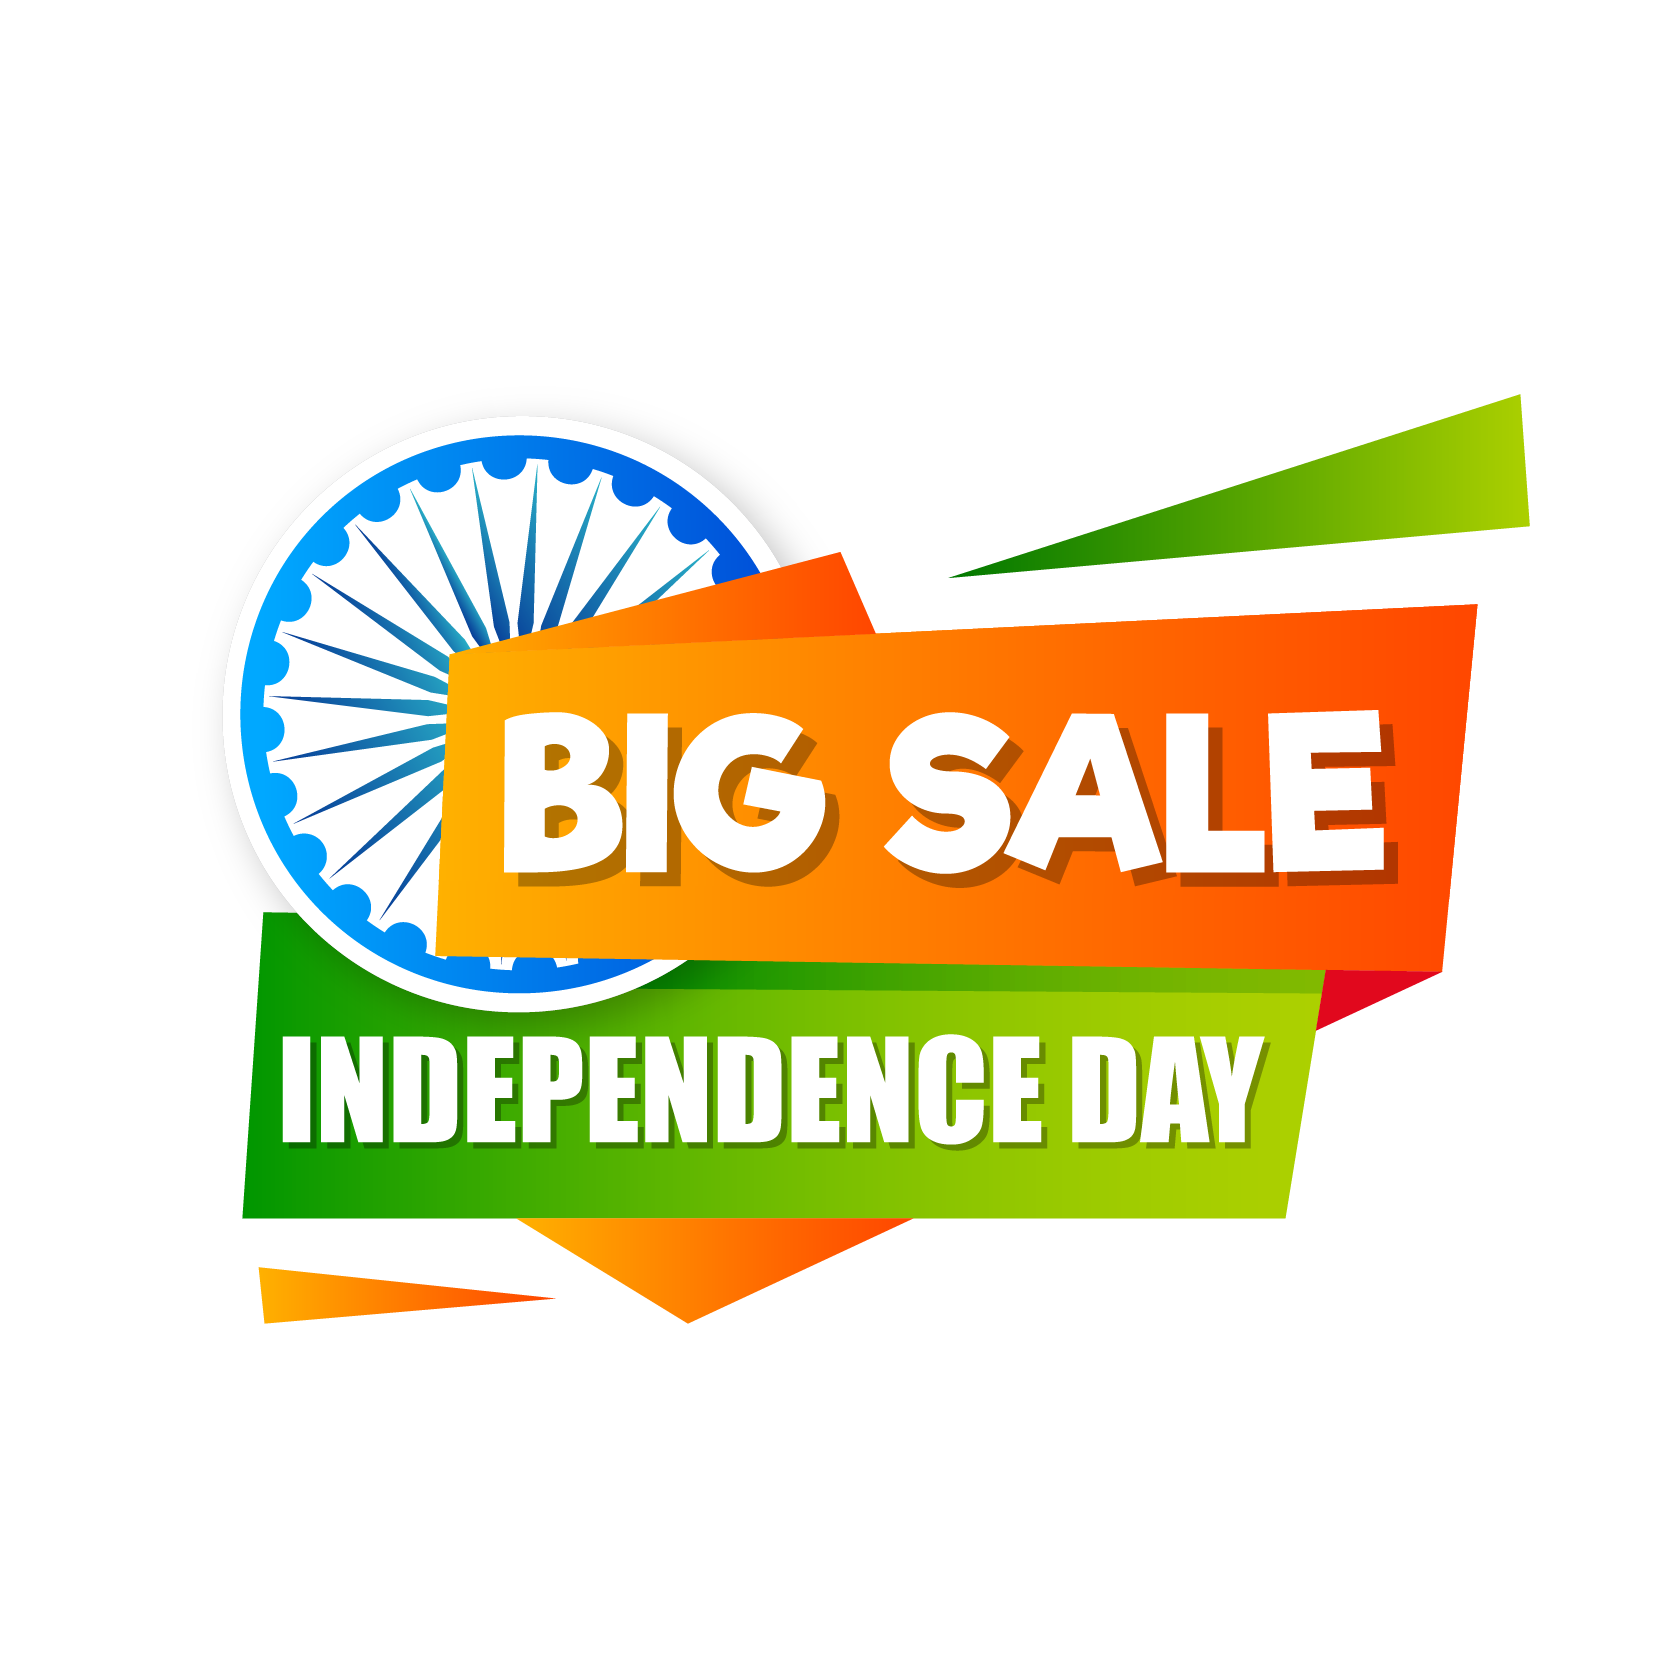 Independence Day offer image